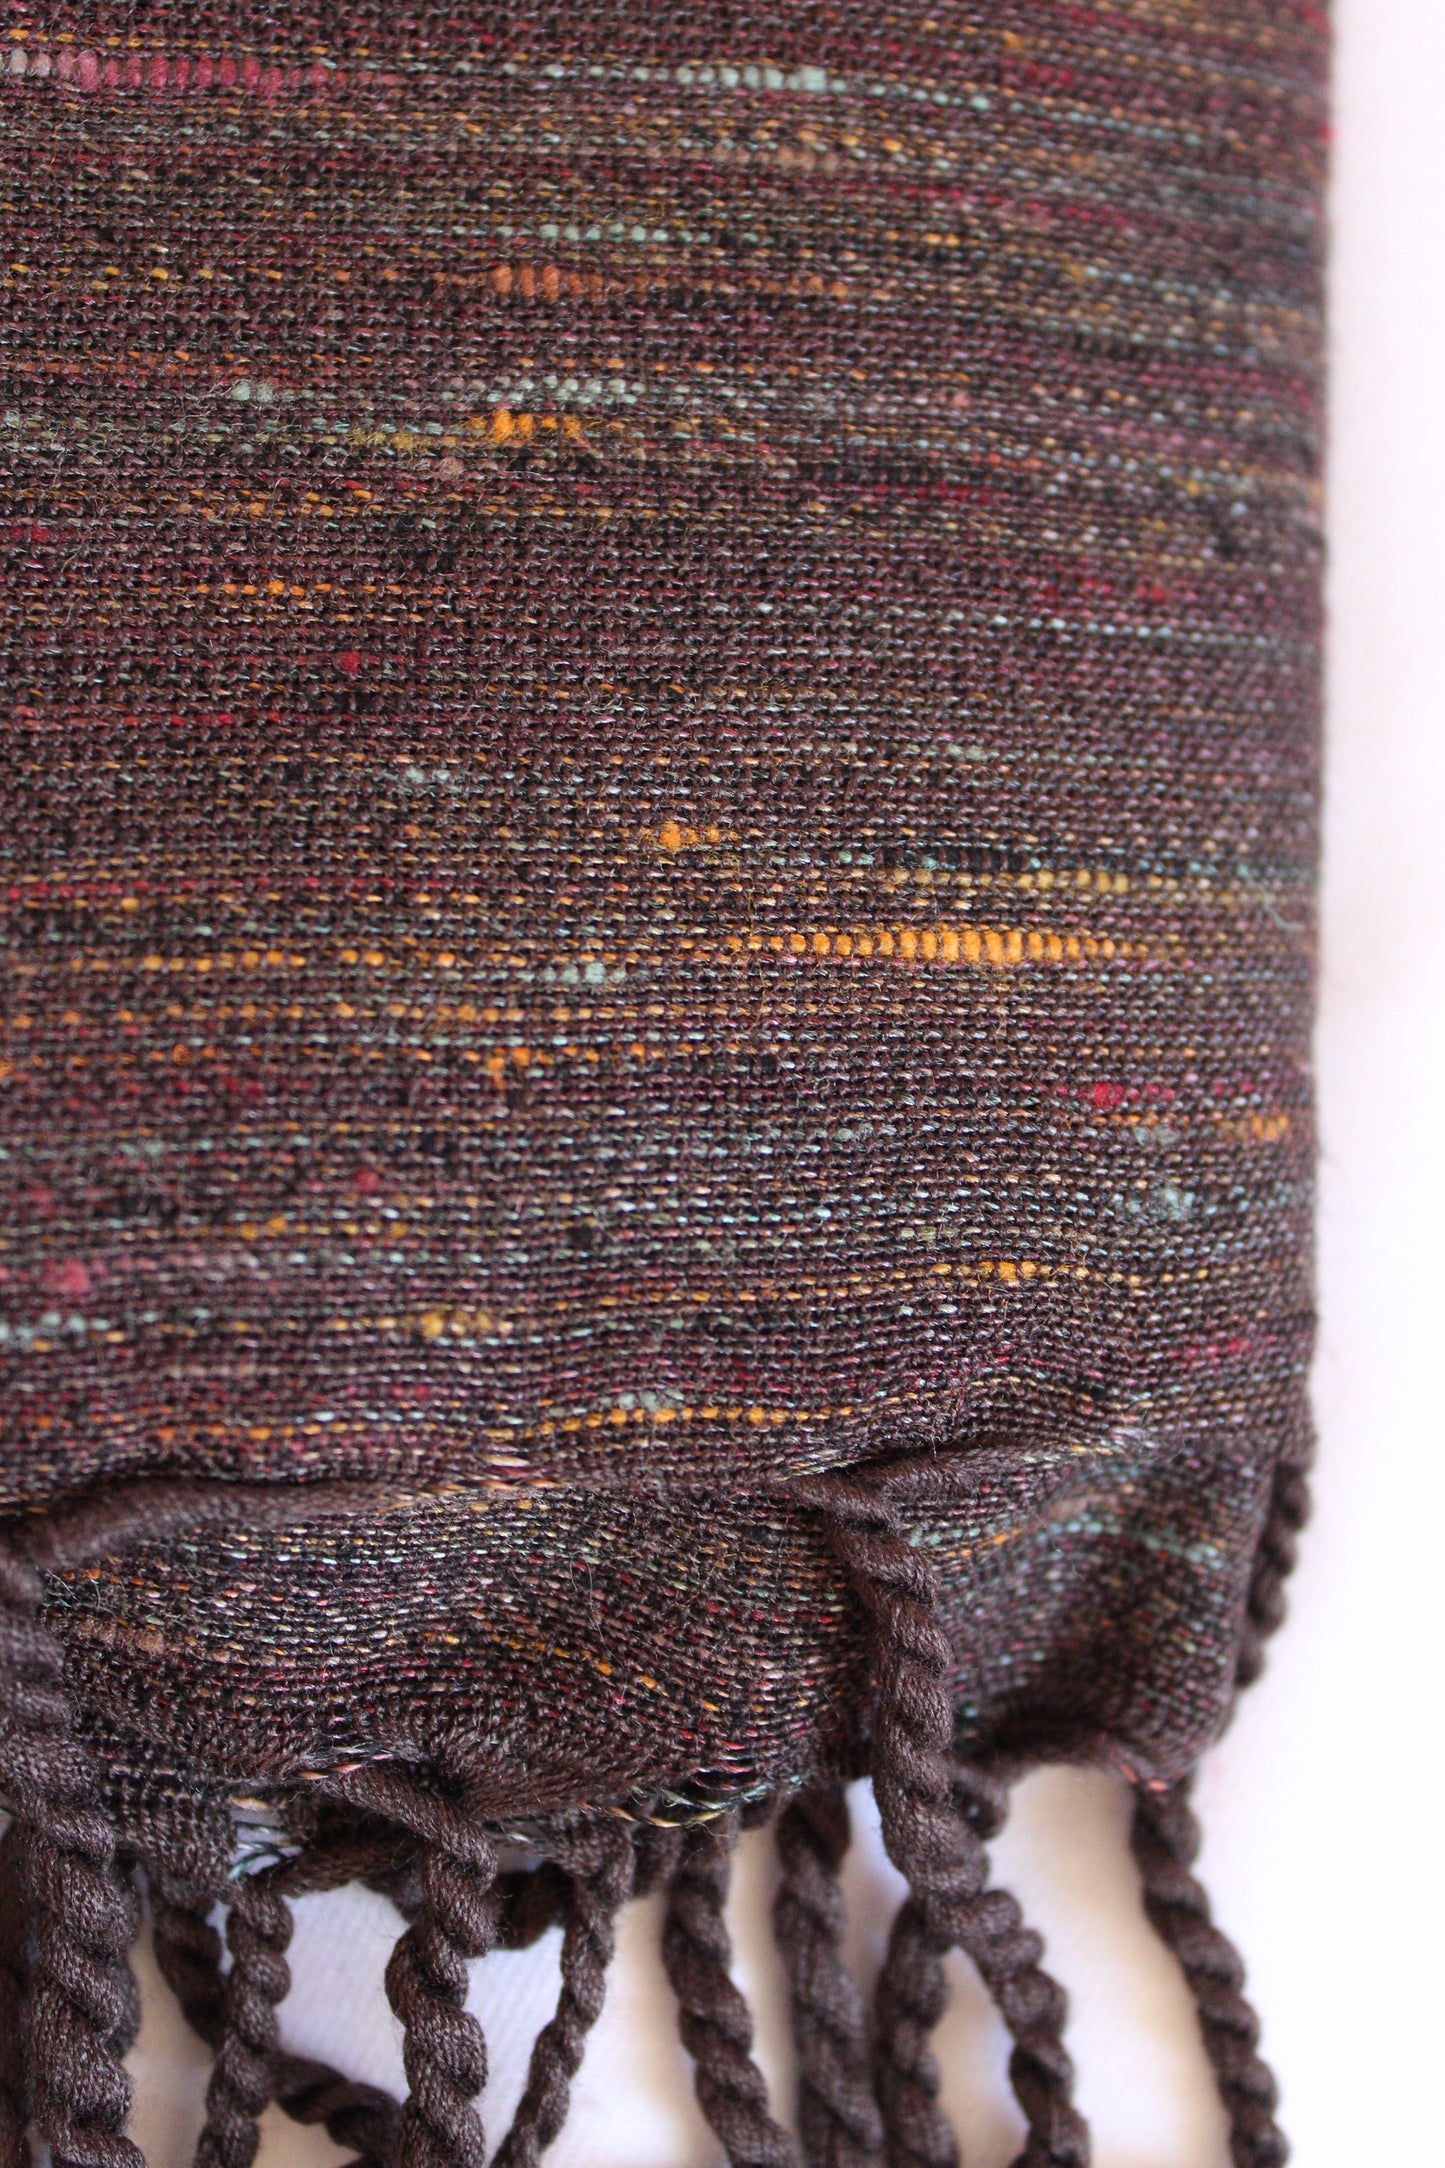 Variegated Handwoven Scarf - Brown